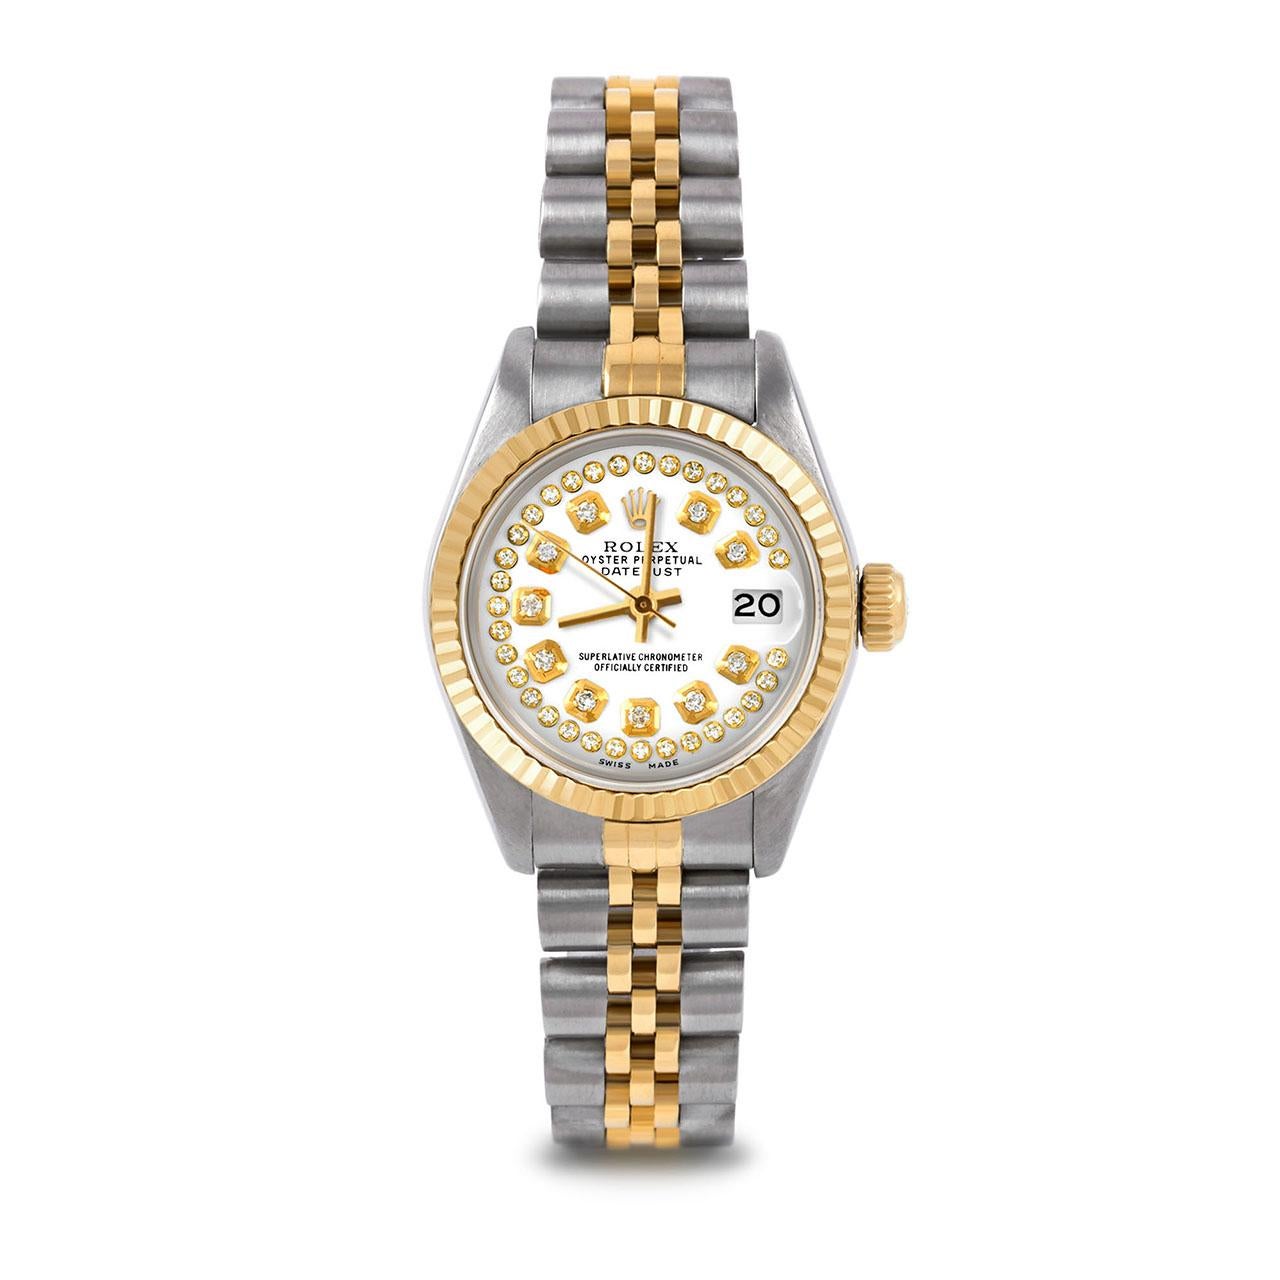 Pre-Owned Rolex 6917 Ladies 26mm Two Tone Datejust Watch, Custom White String Diamond Dial & Fluted Bezel on Rolex 14K Yellow Gold And Stainless Steel Jubilee Band.   

SKU 6917-TT-WHT-STRD-FLT-JBL


Brand/Model:        Rolex Datejust
Model Number: 